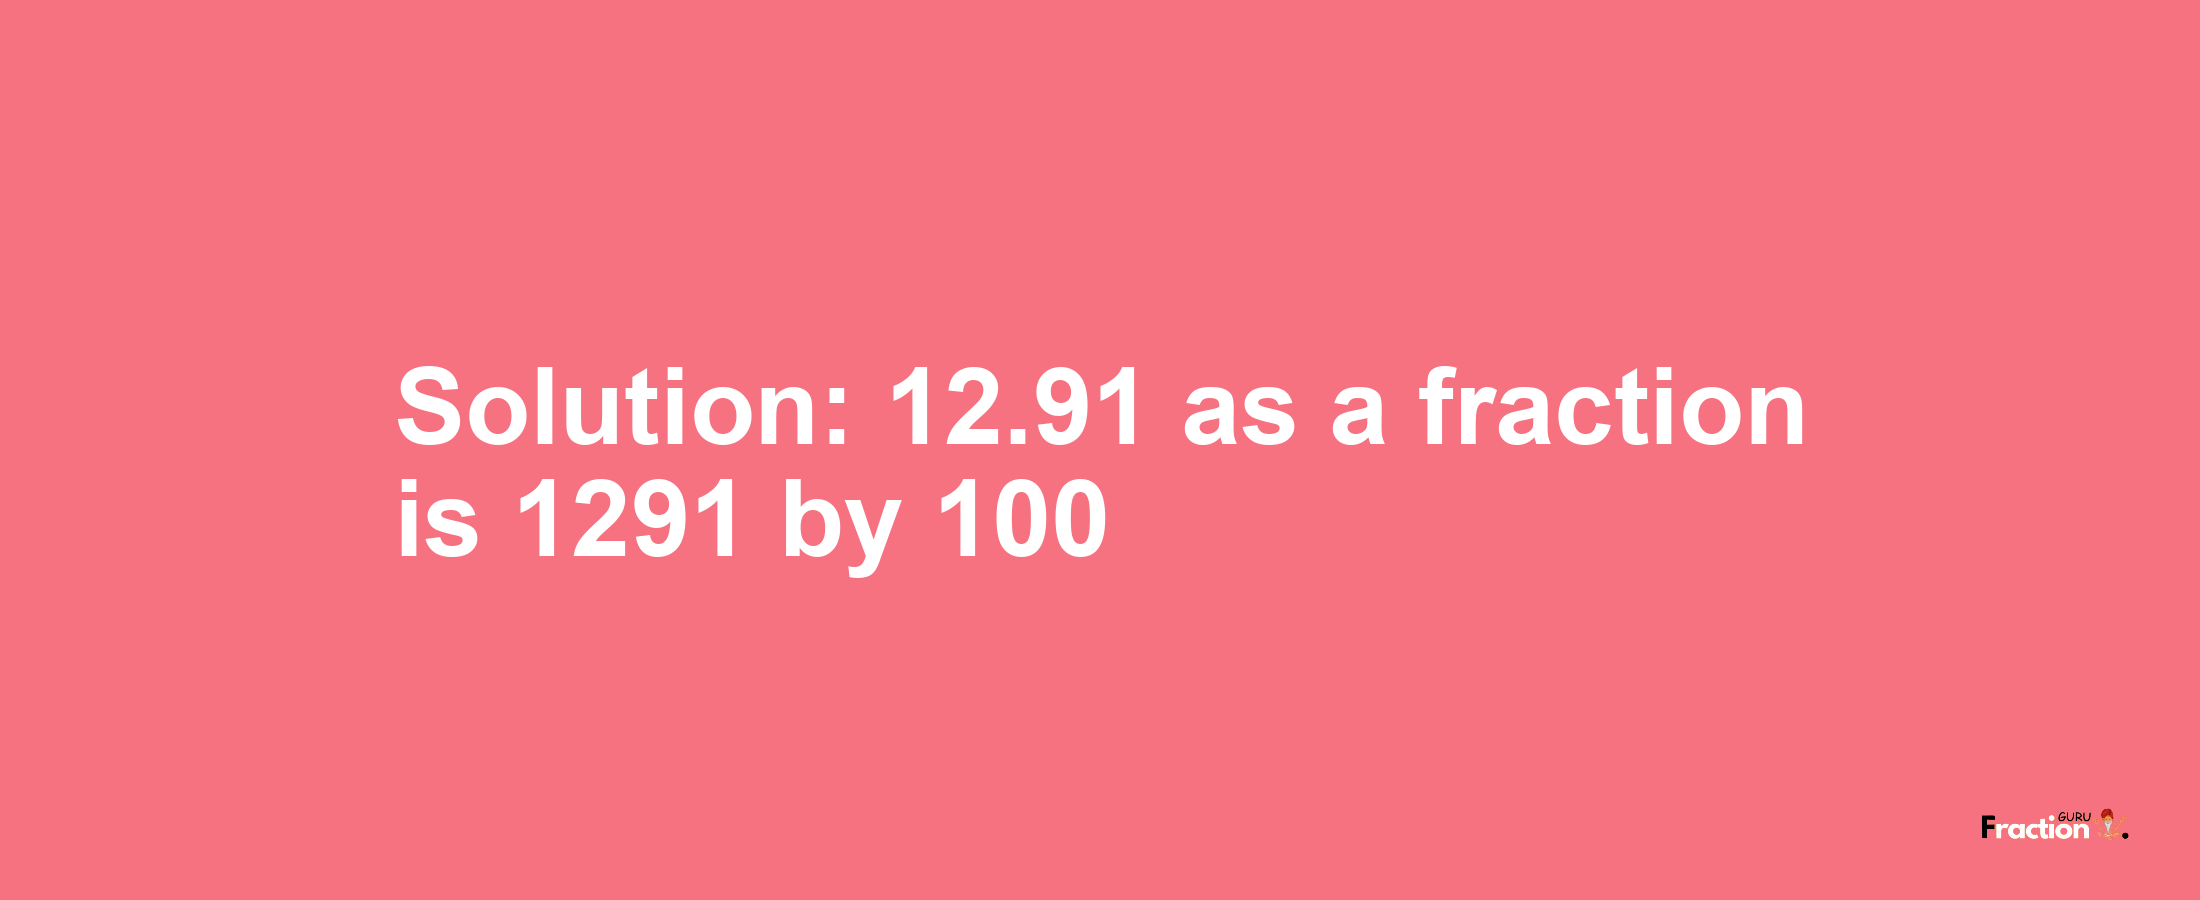 Solution:12.91 as a fraction is 1291/100